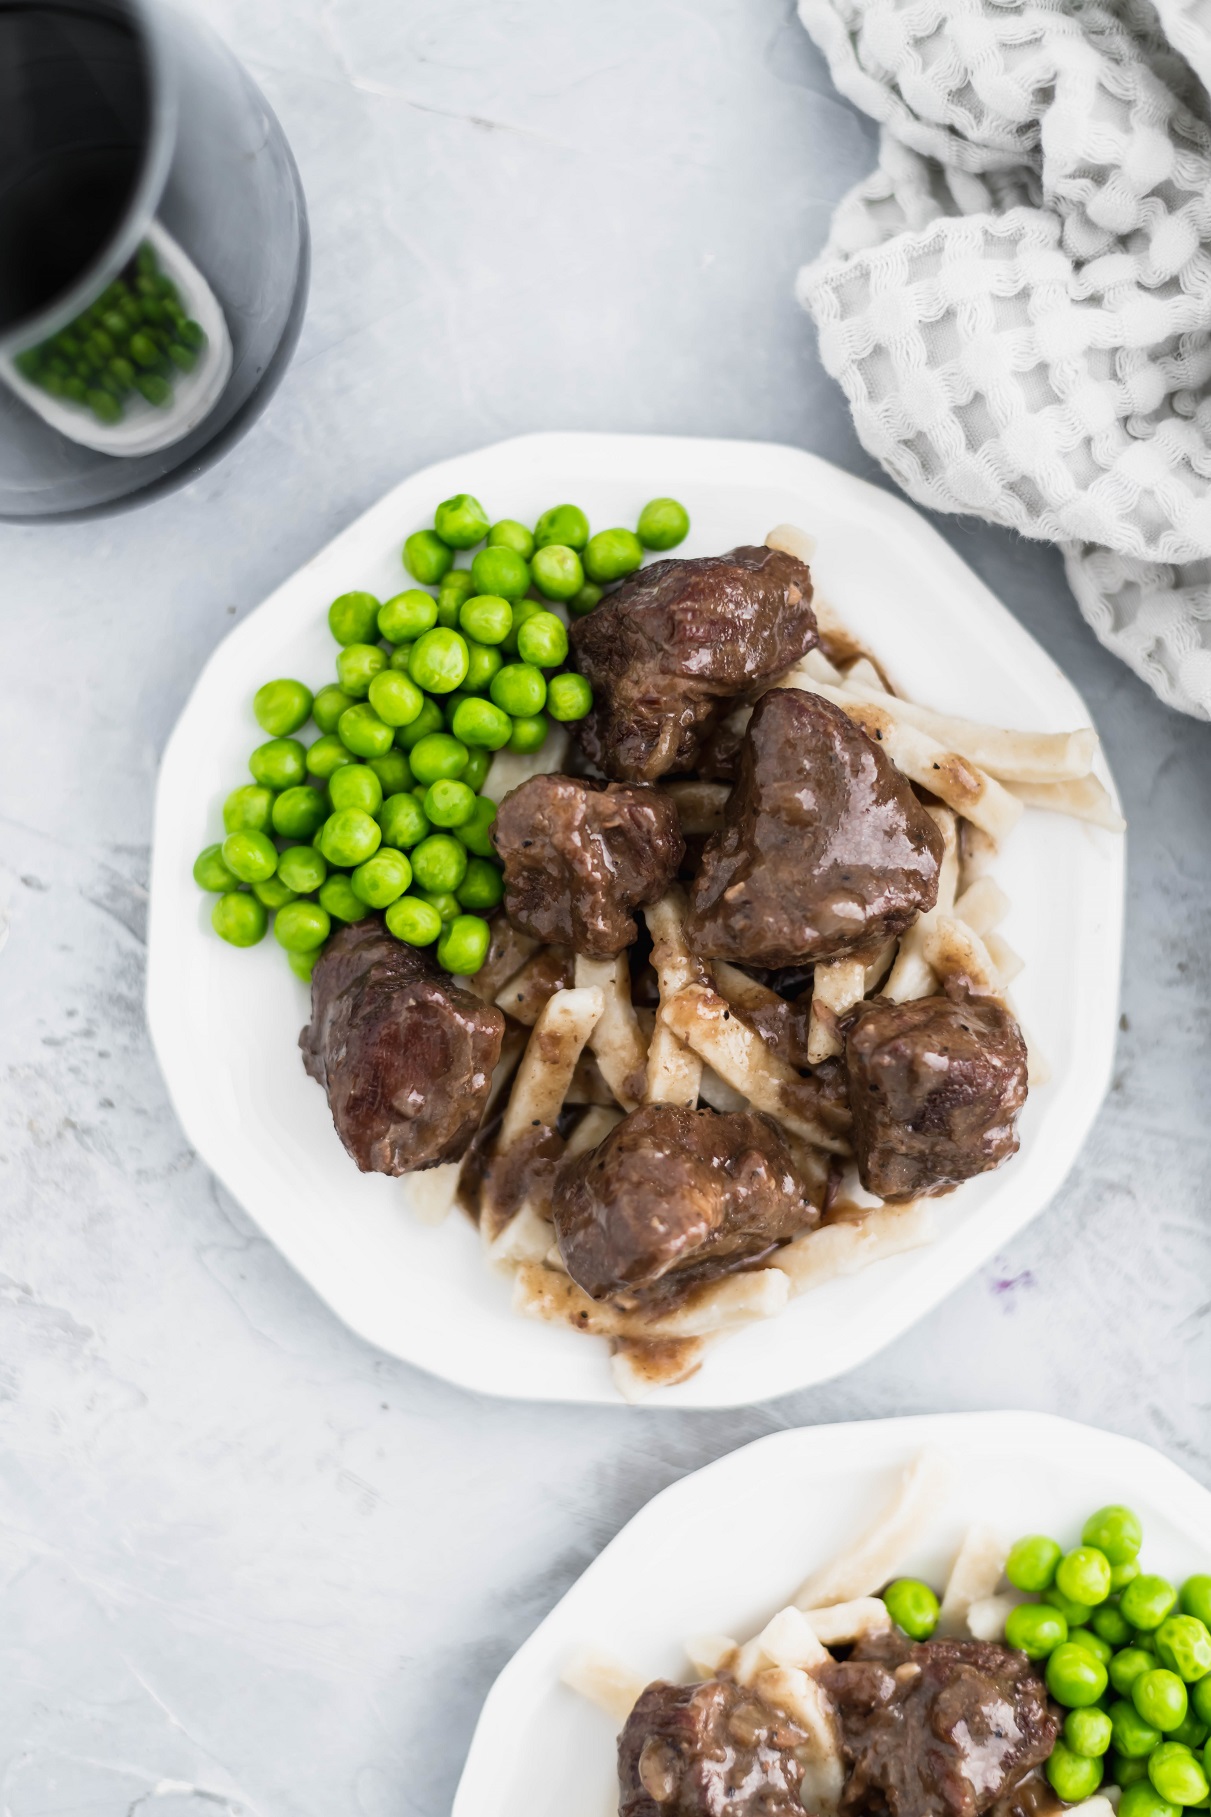 Tender instant pot beef tips over egg noodles with a side of peas on a small white round plate. Another prepared plate peeking in lower right corner.